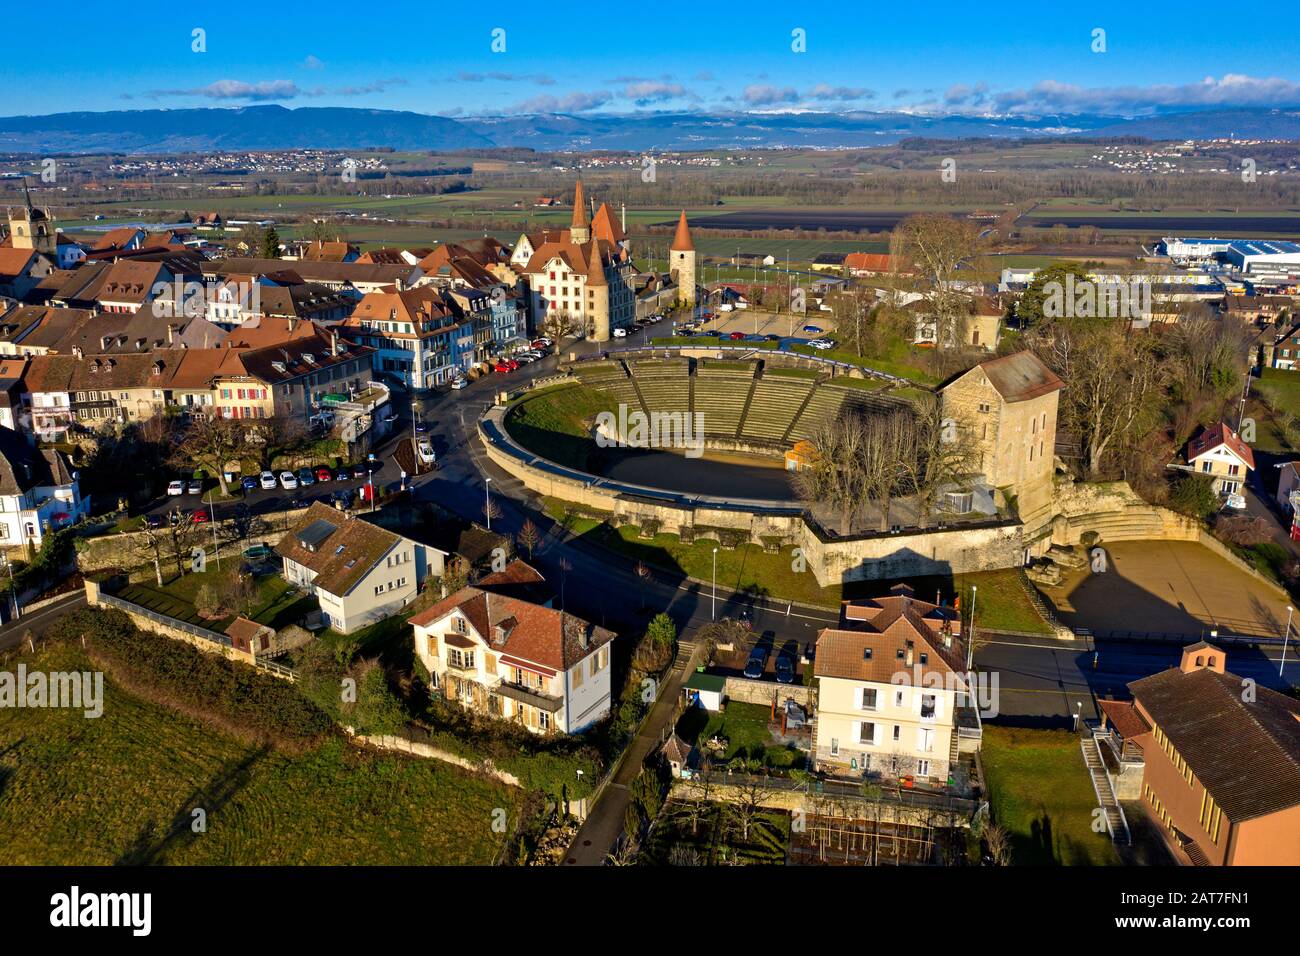 Page 2 - Hinten High Resolution Stock Photography and Images - Alamy